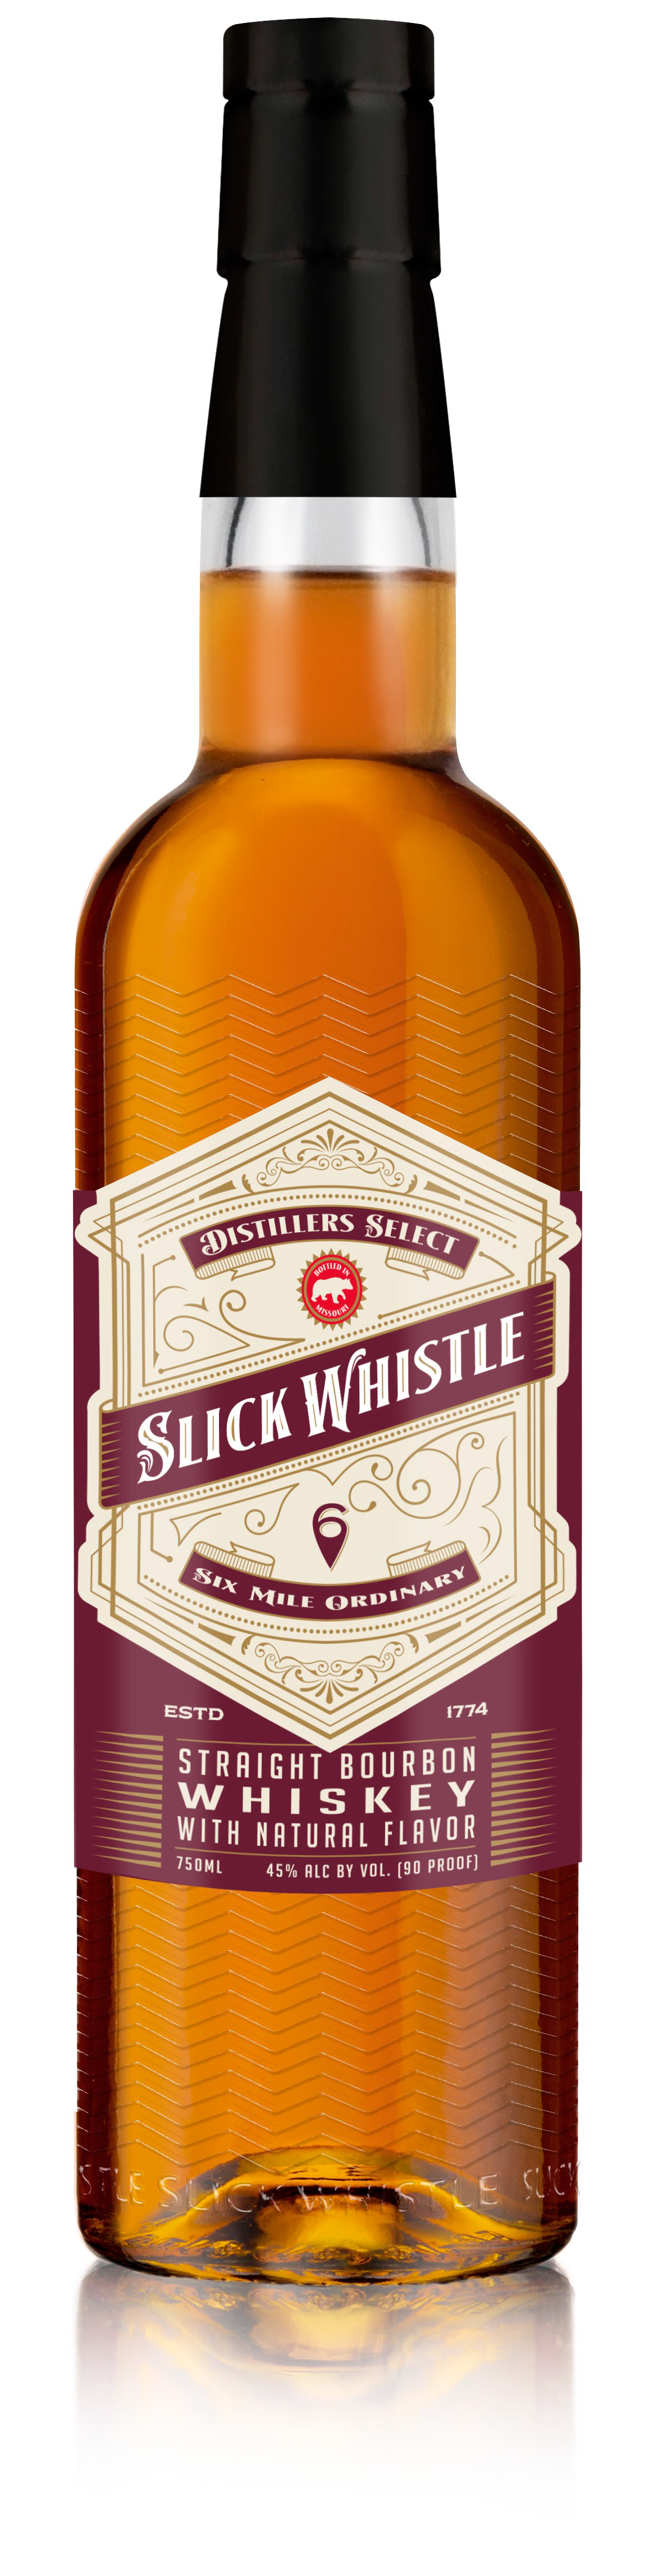 Slick Whistle Whiskey Bottle. Enjoy a Better Whiskey with Slick Whistle from Six-Mile Ordinary.